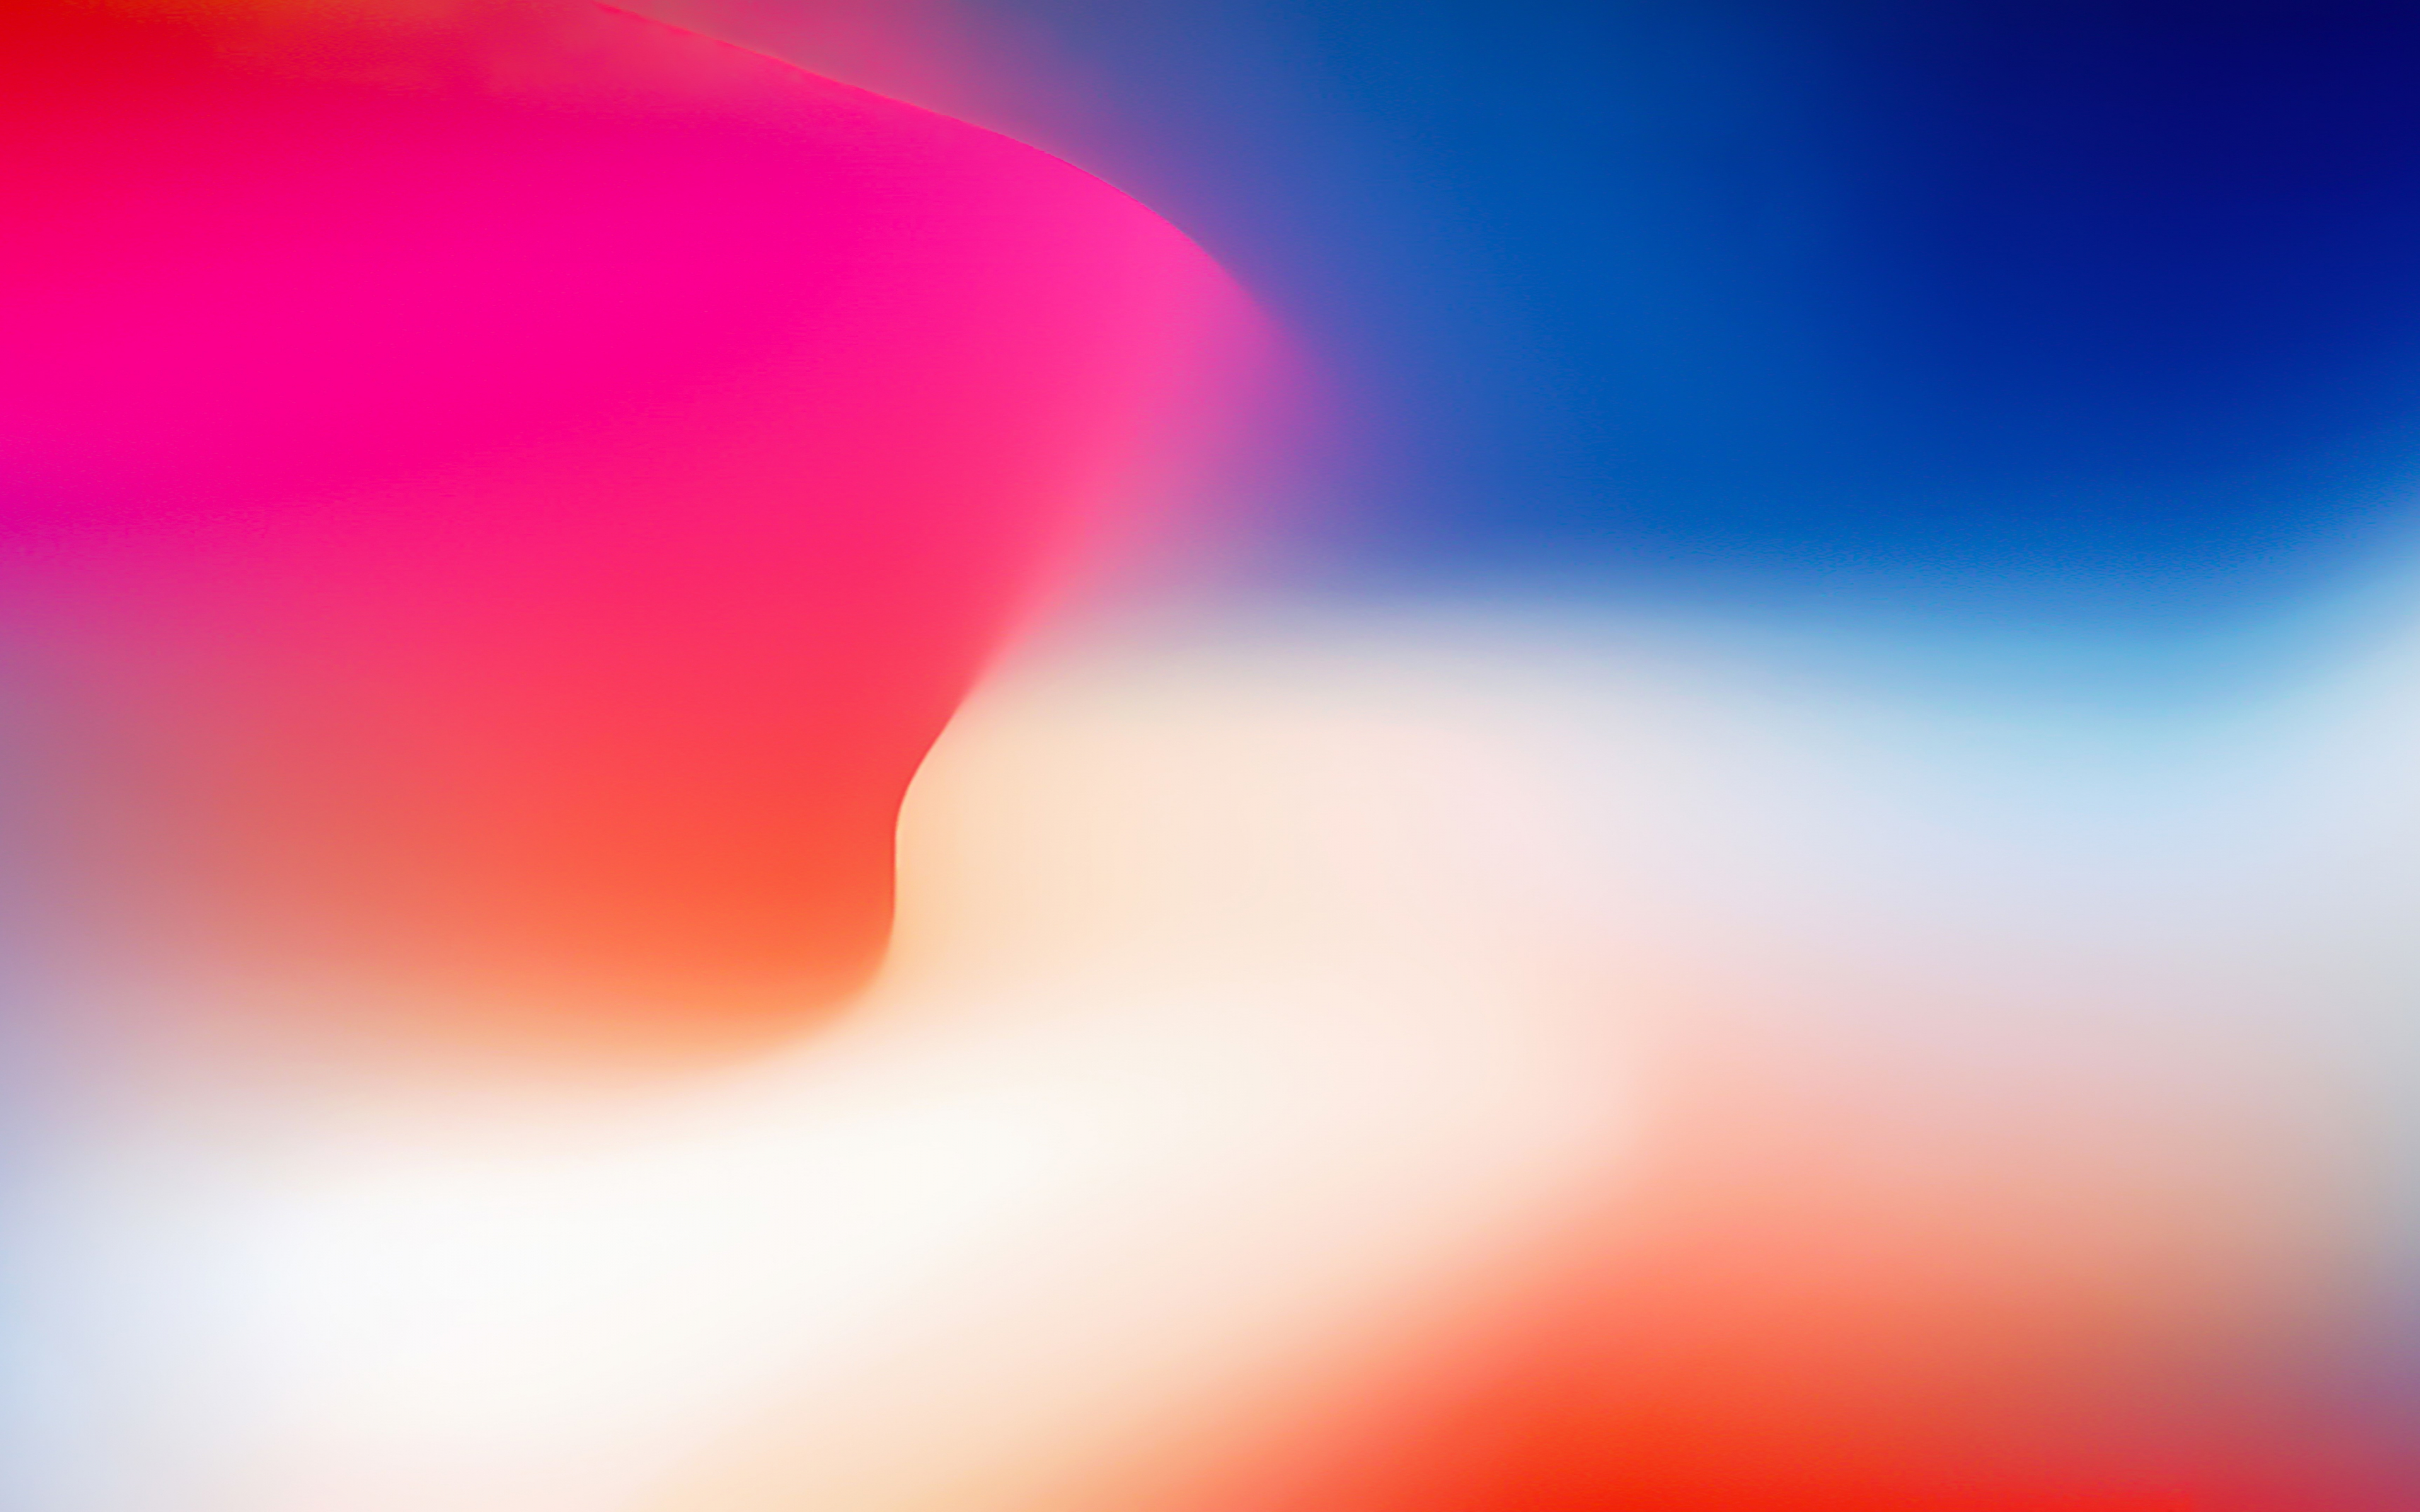 Download 3840x2400 Wallpaper Iphone X Stock Colorful Gradient